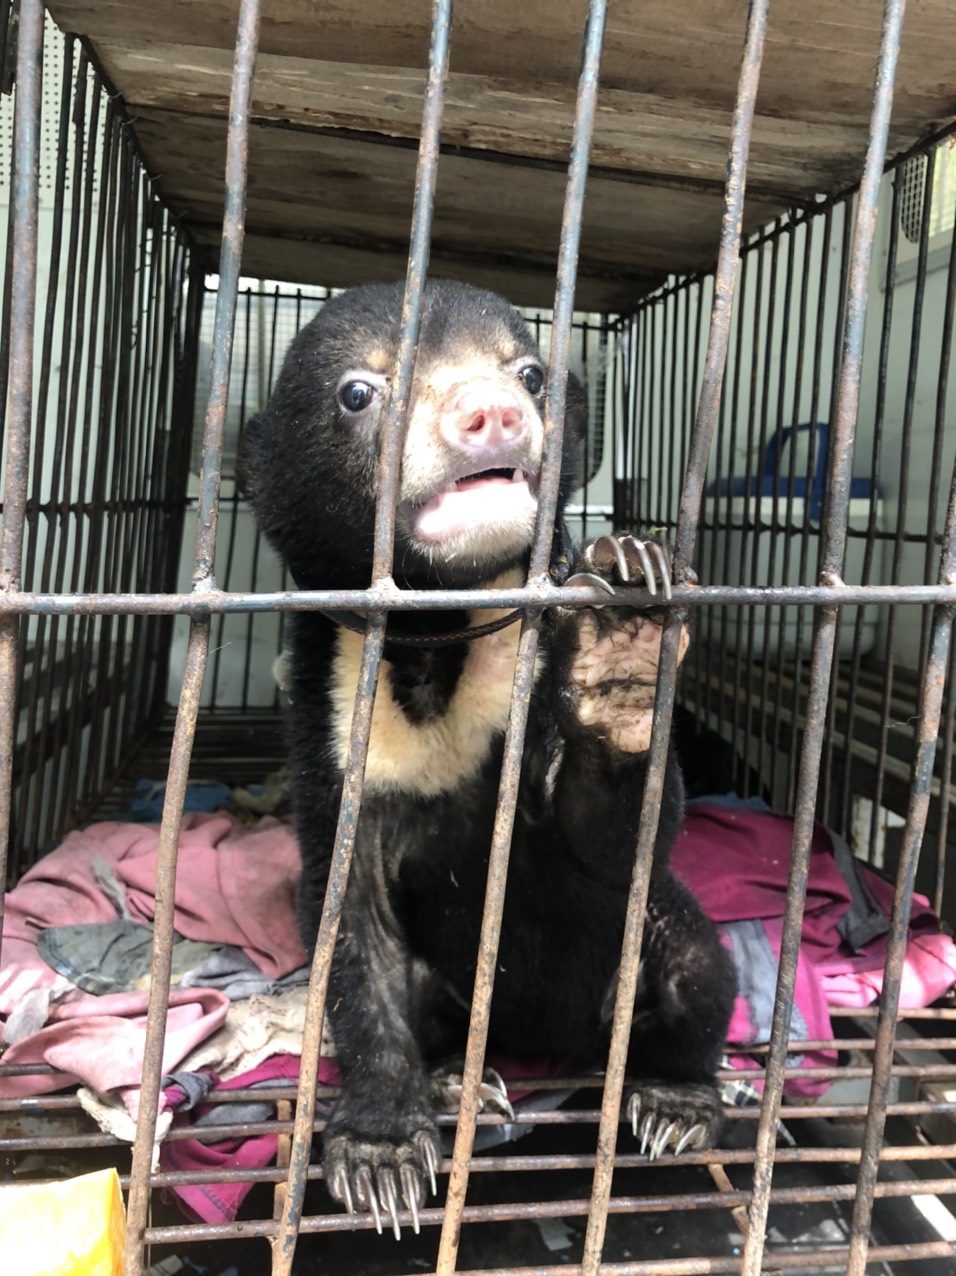 Two jailed for illicitly raising sun bear cub in northern Vietnam